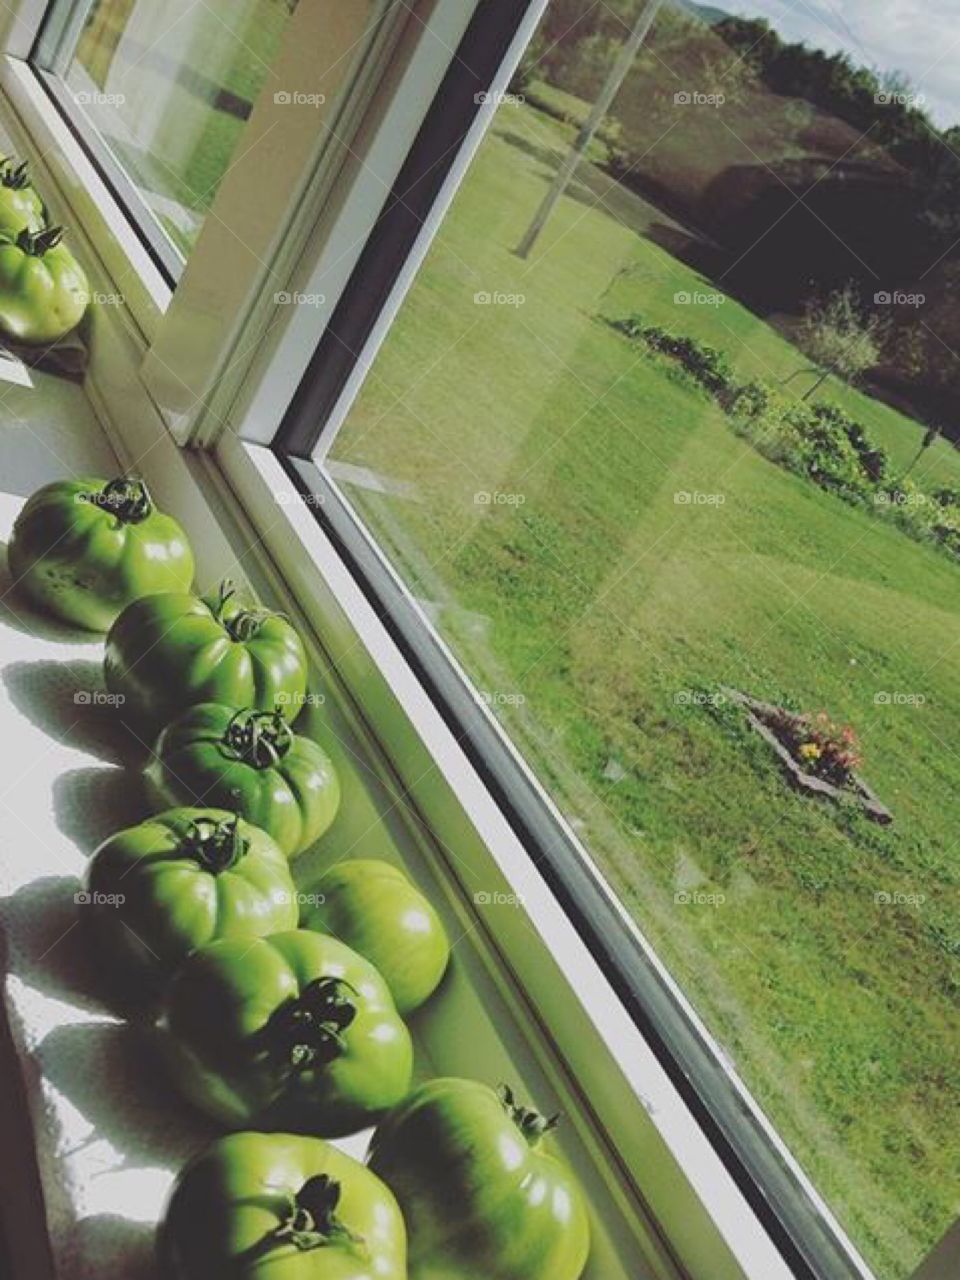 Green tomatoes ripening on a window sill. Over looking garden. 